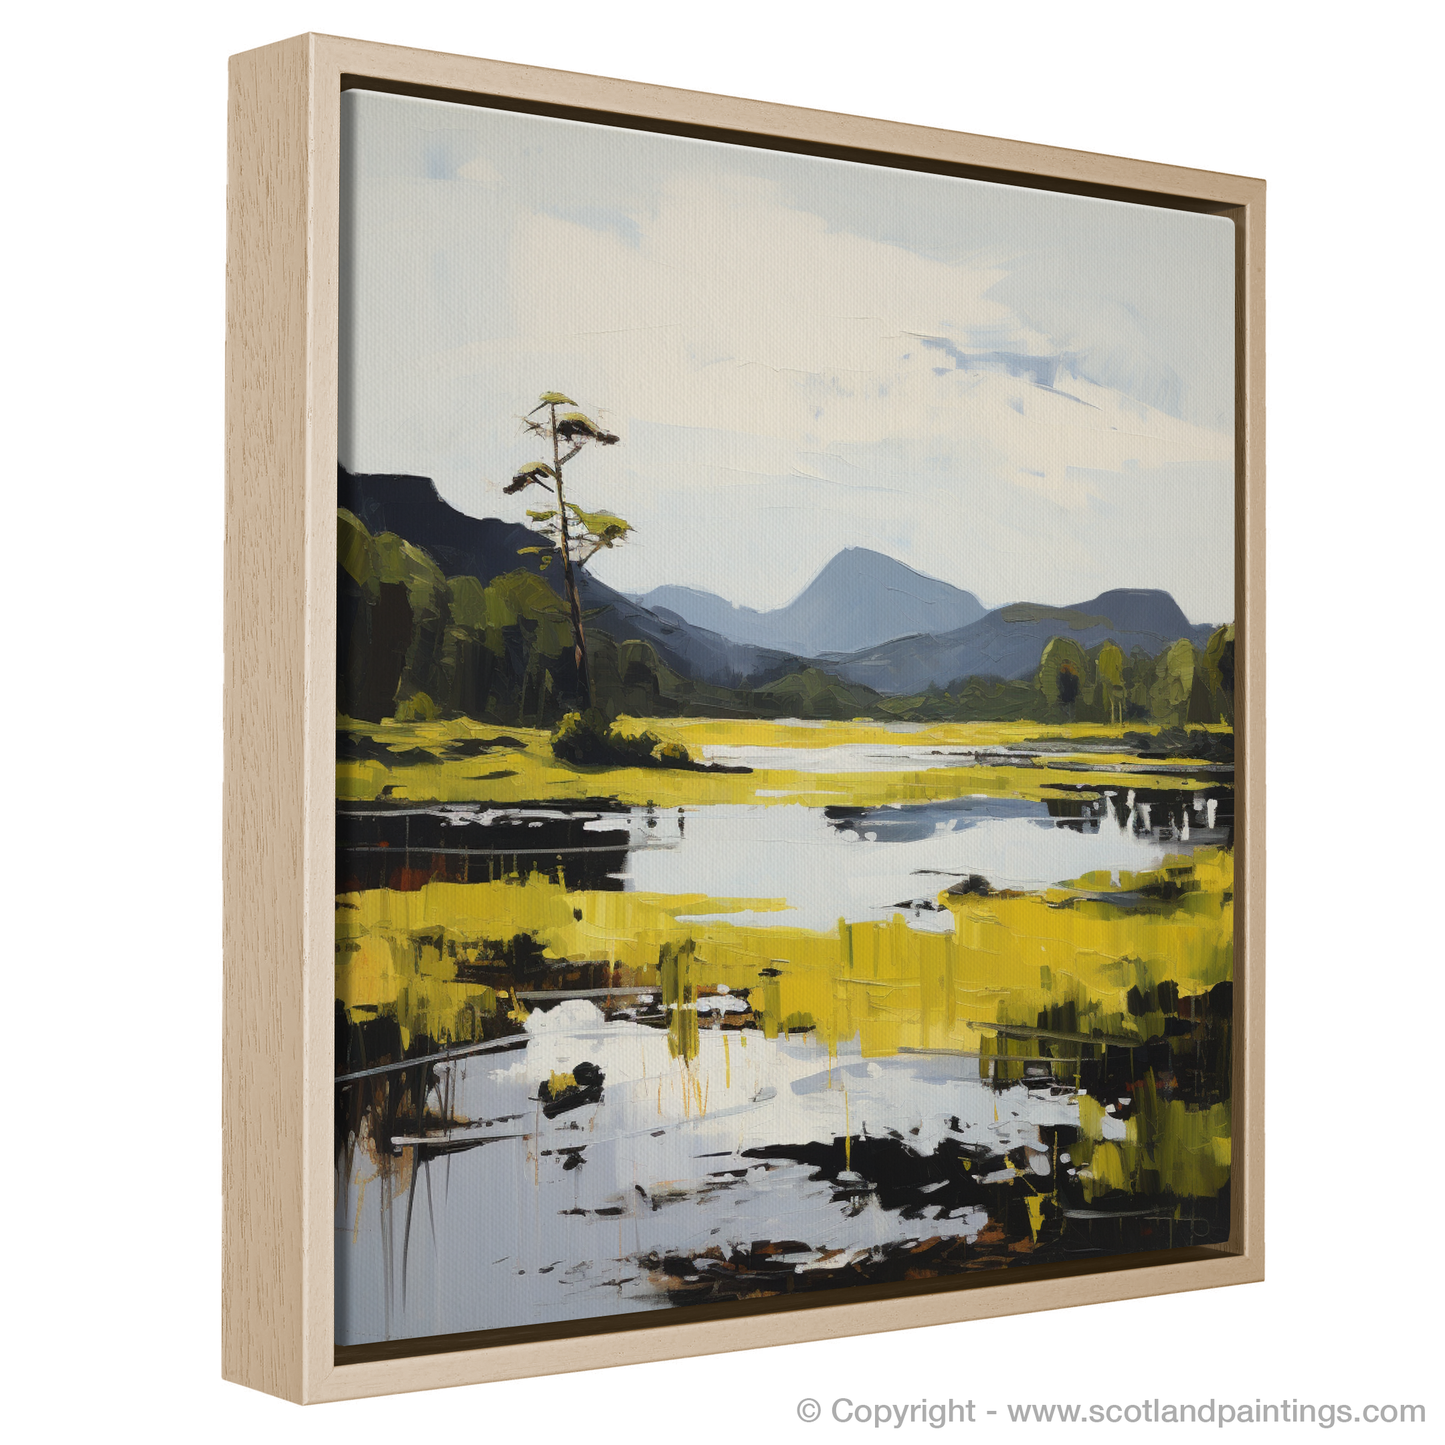 Painting and Art Print of Loch Ard, Stirling in summer entitled "Summer Splendour at Loch Ard Stirling".